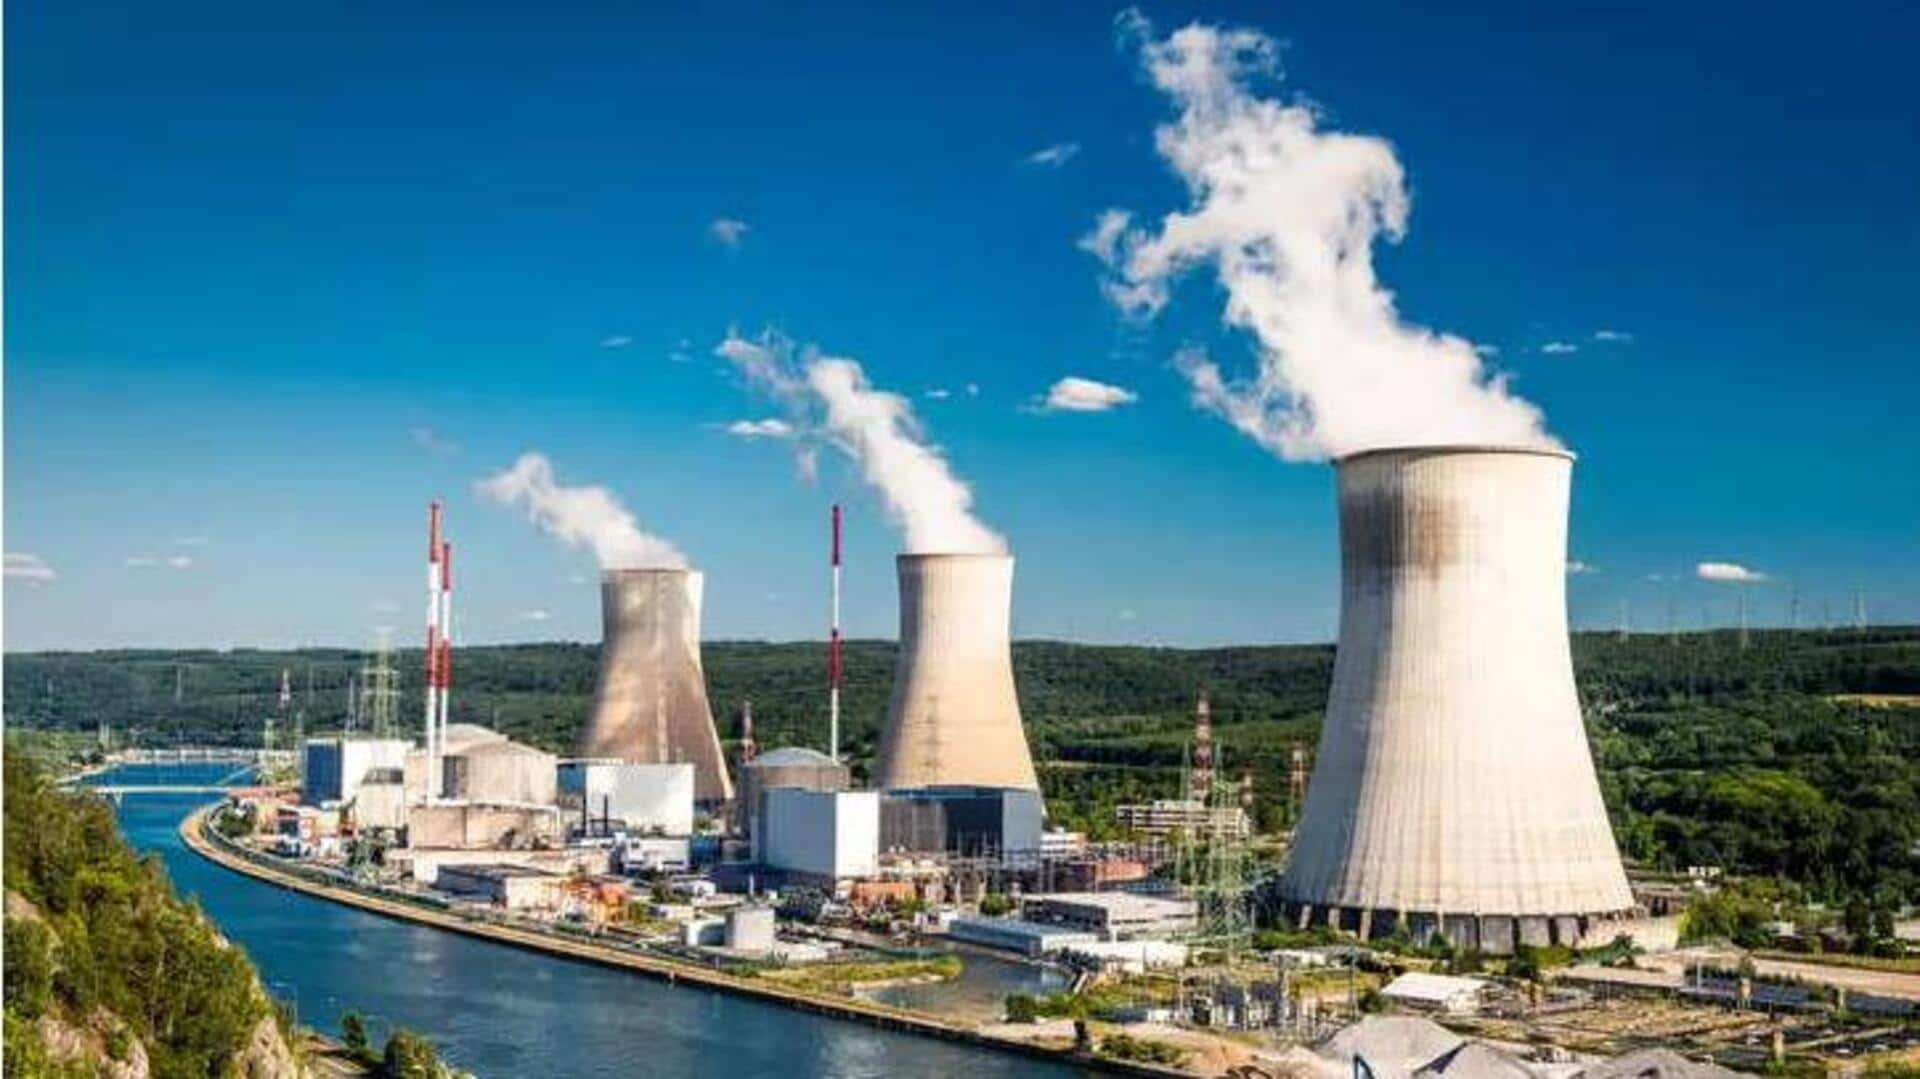 In a first, India seeks private investment in nuclear energy